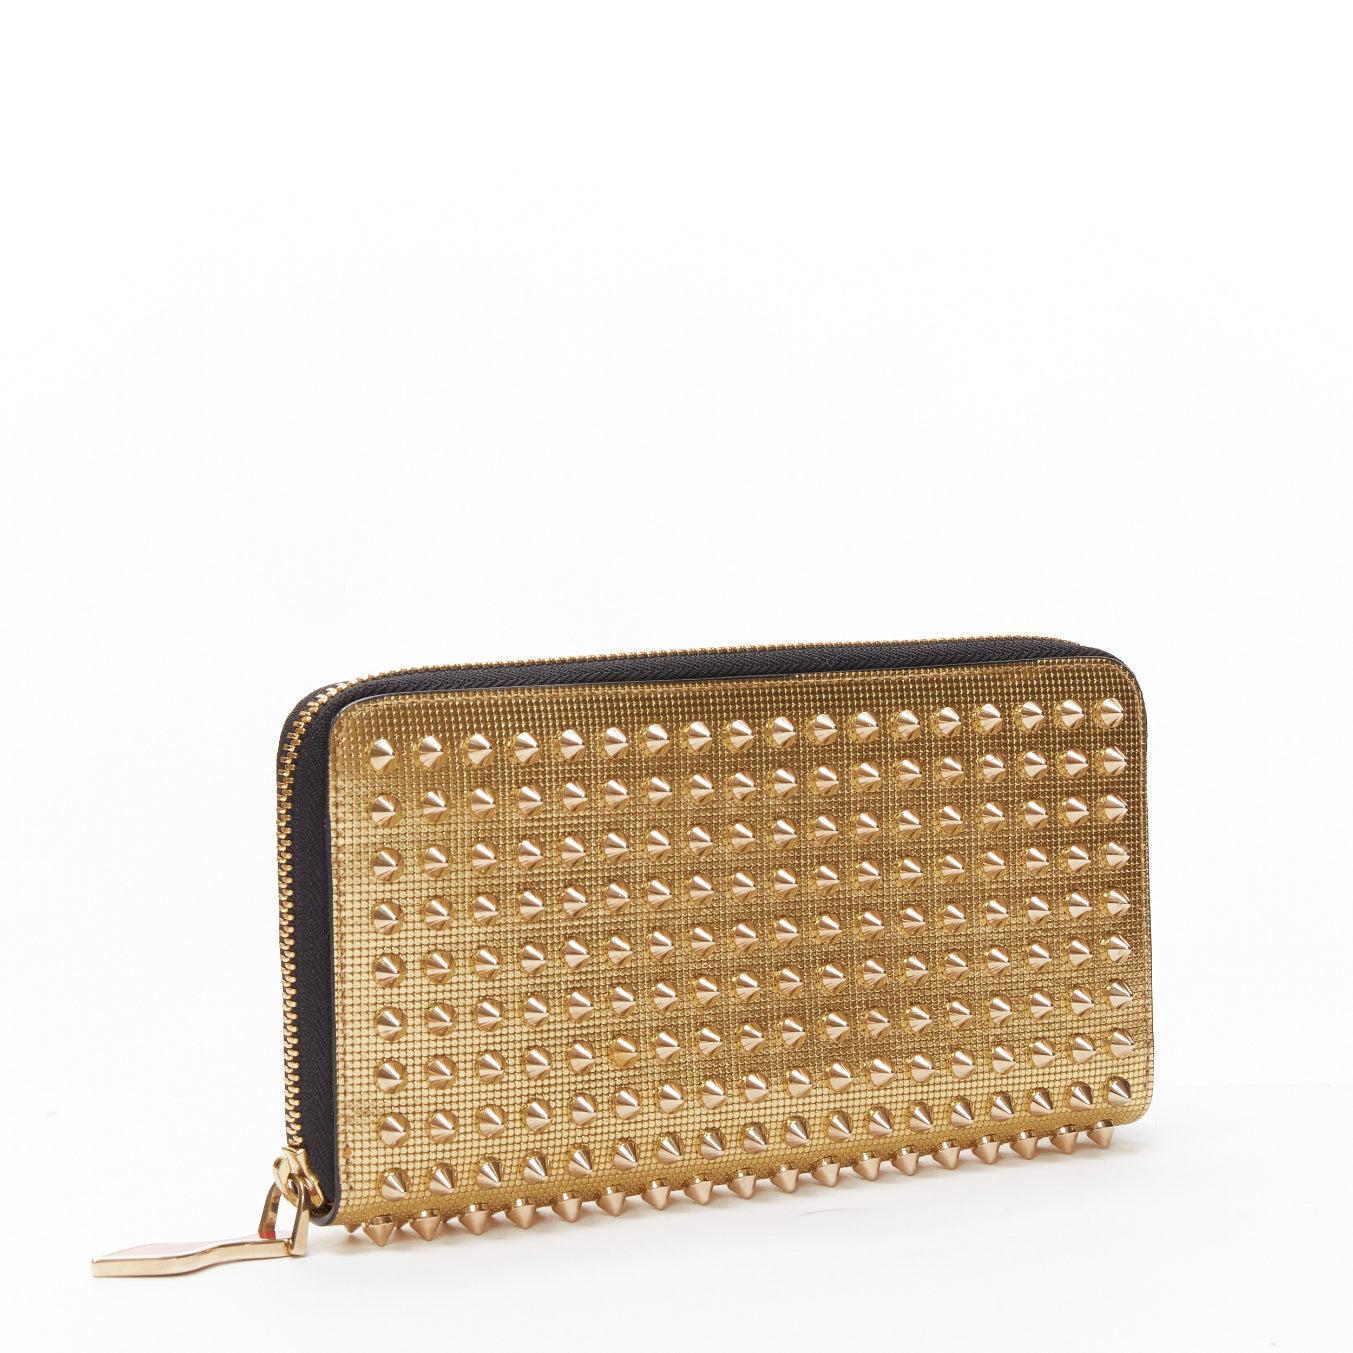 Brown CHRISTIAN LOUBOUTIN Panettone gold studded leather zip around long wallet For Sale